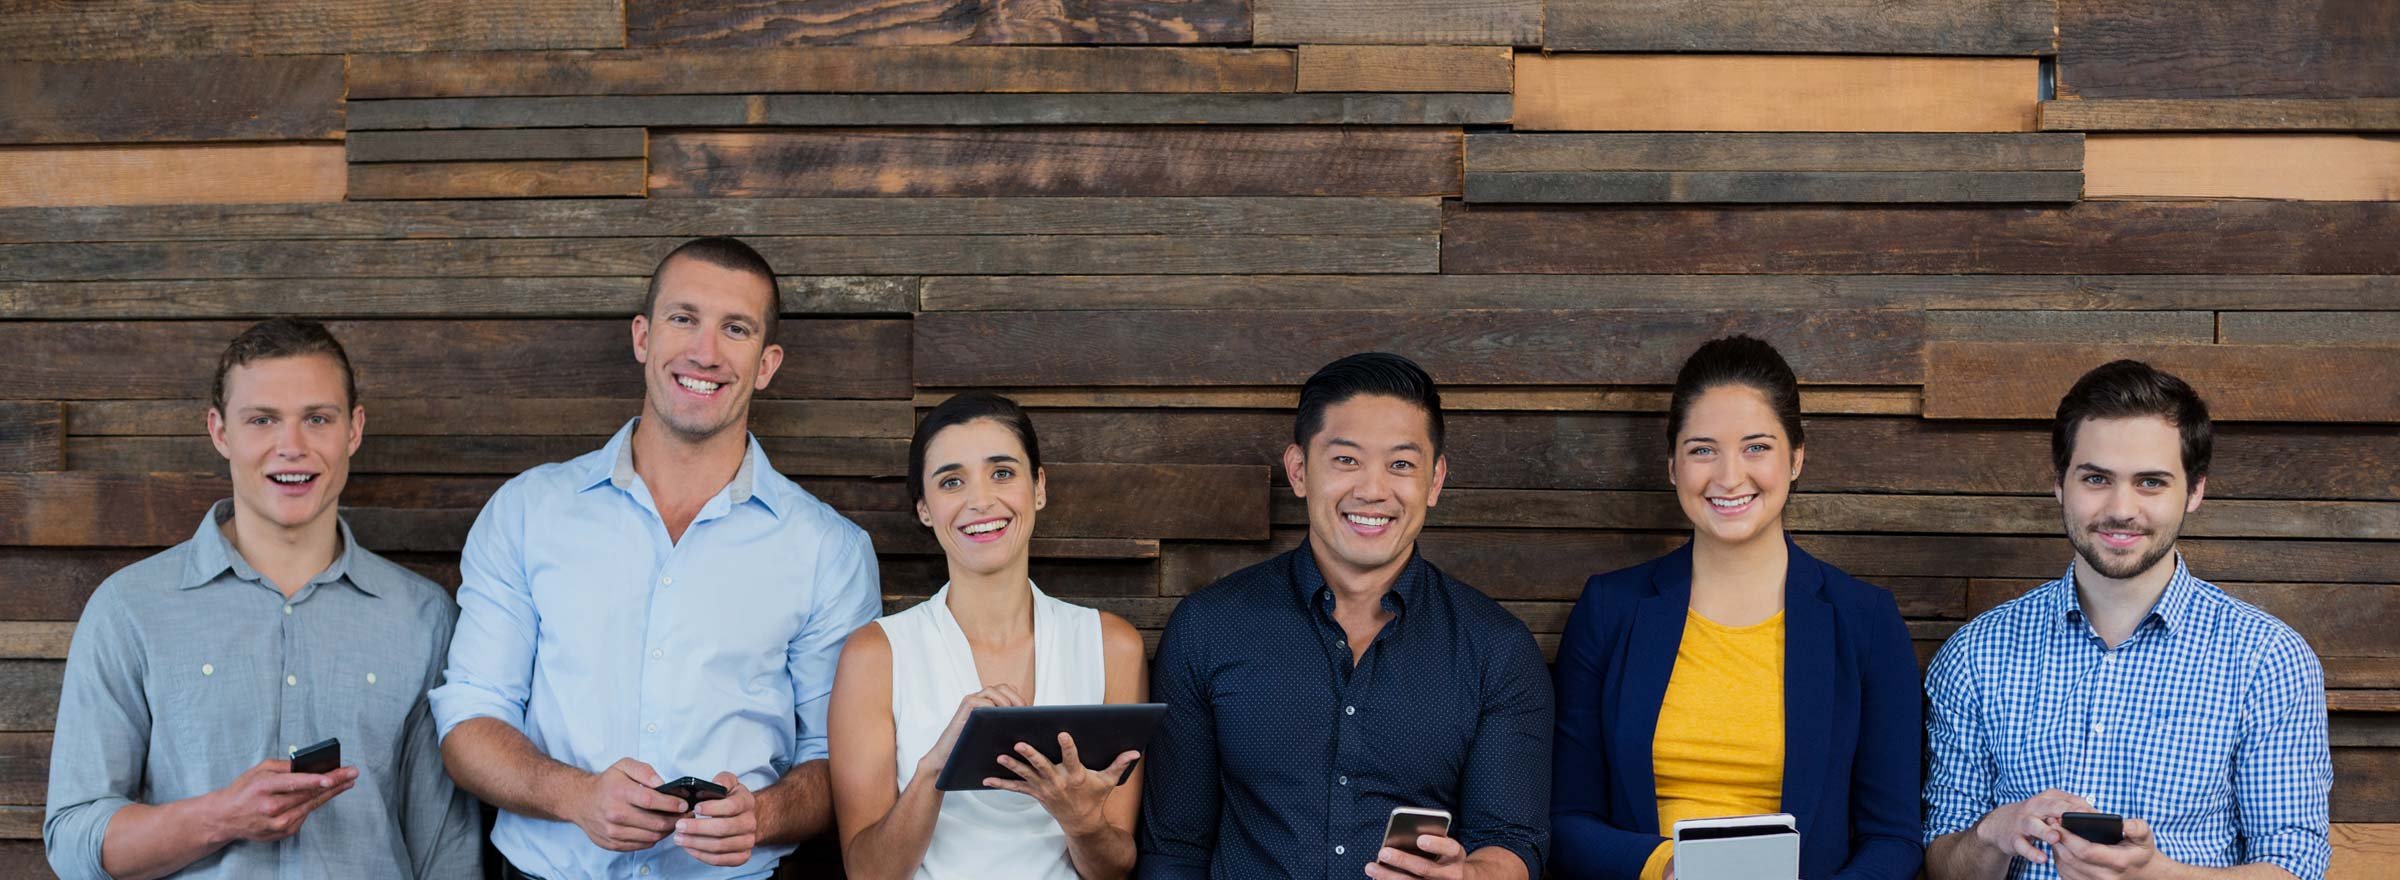 two women and four men standing against a wooden wall, holding cellphones or tablets, and smiling